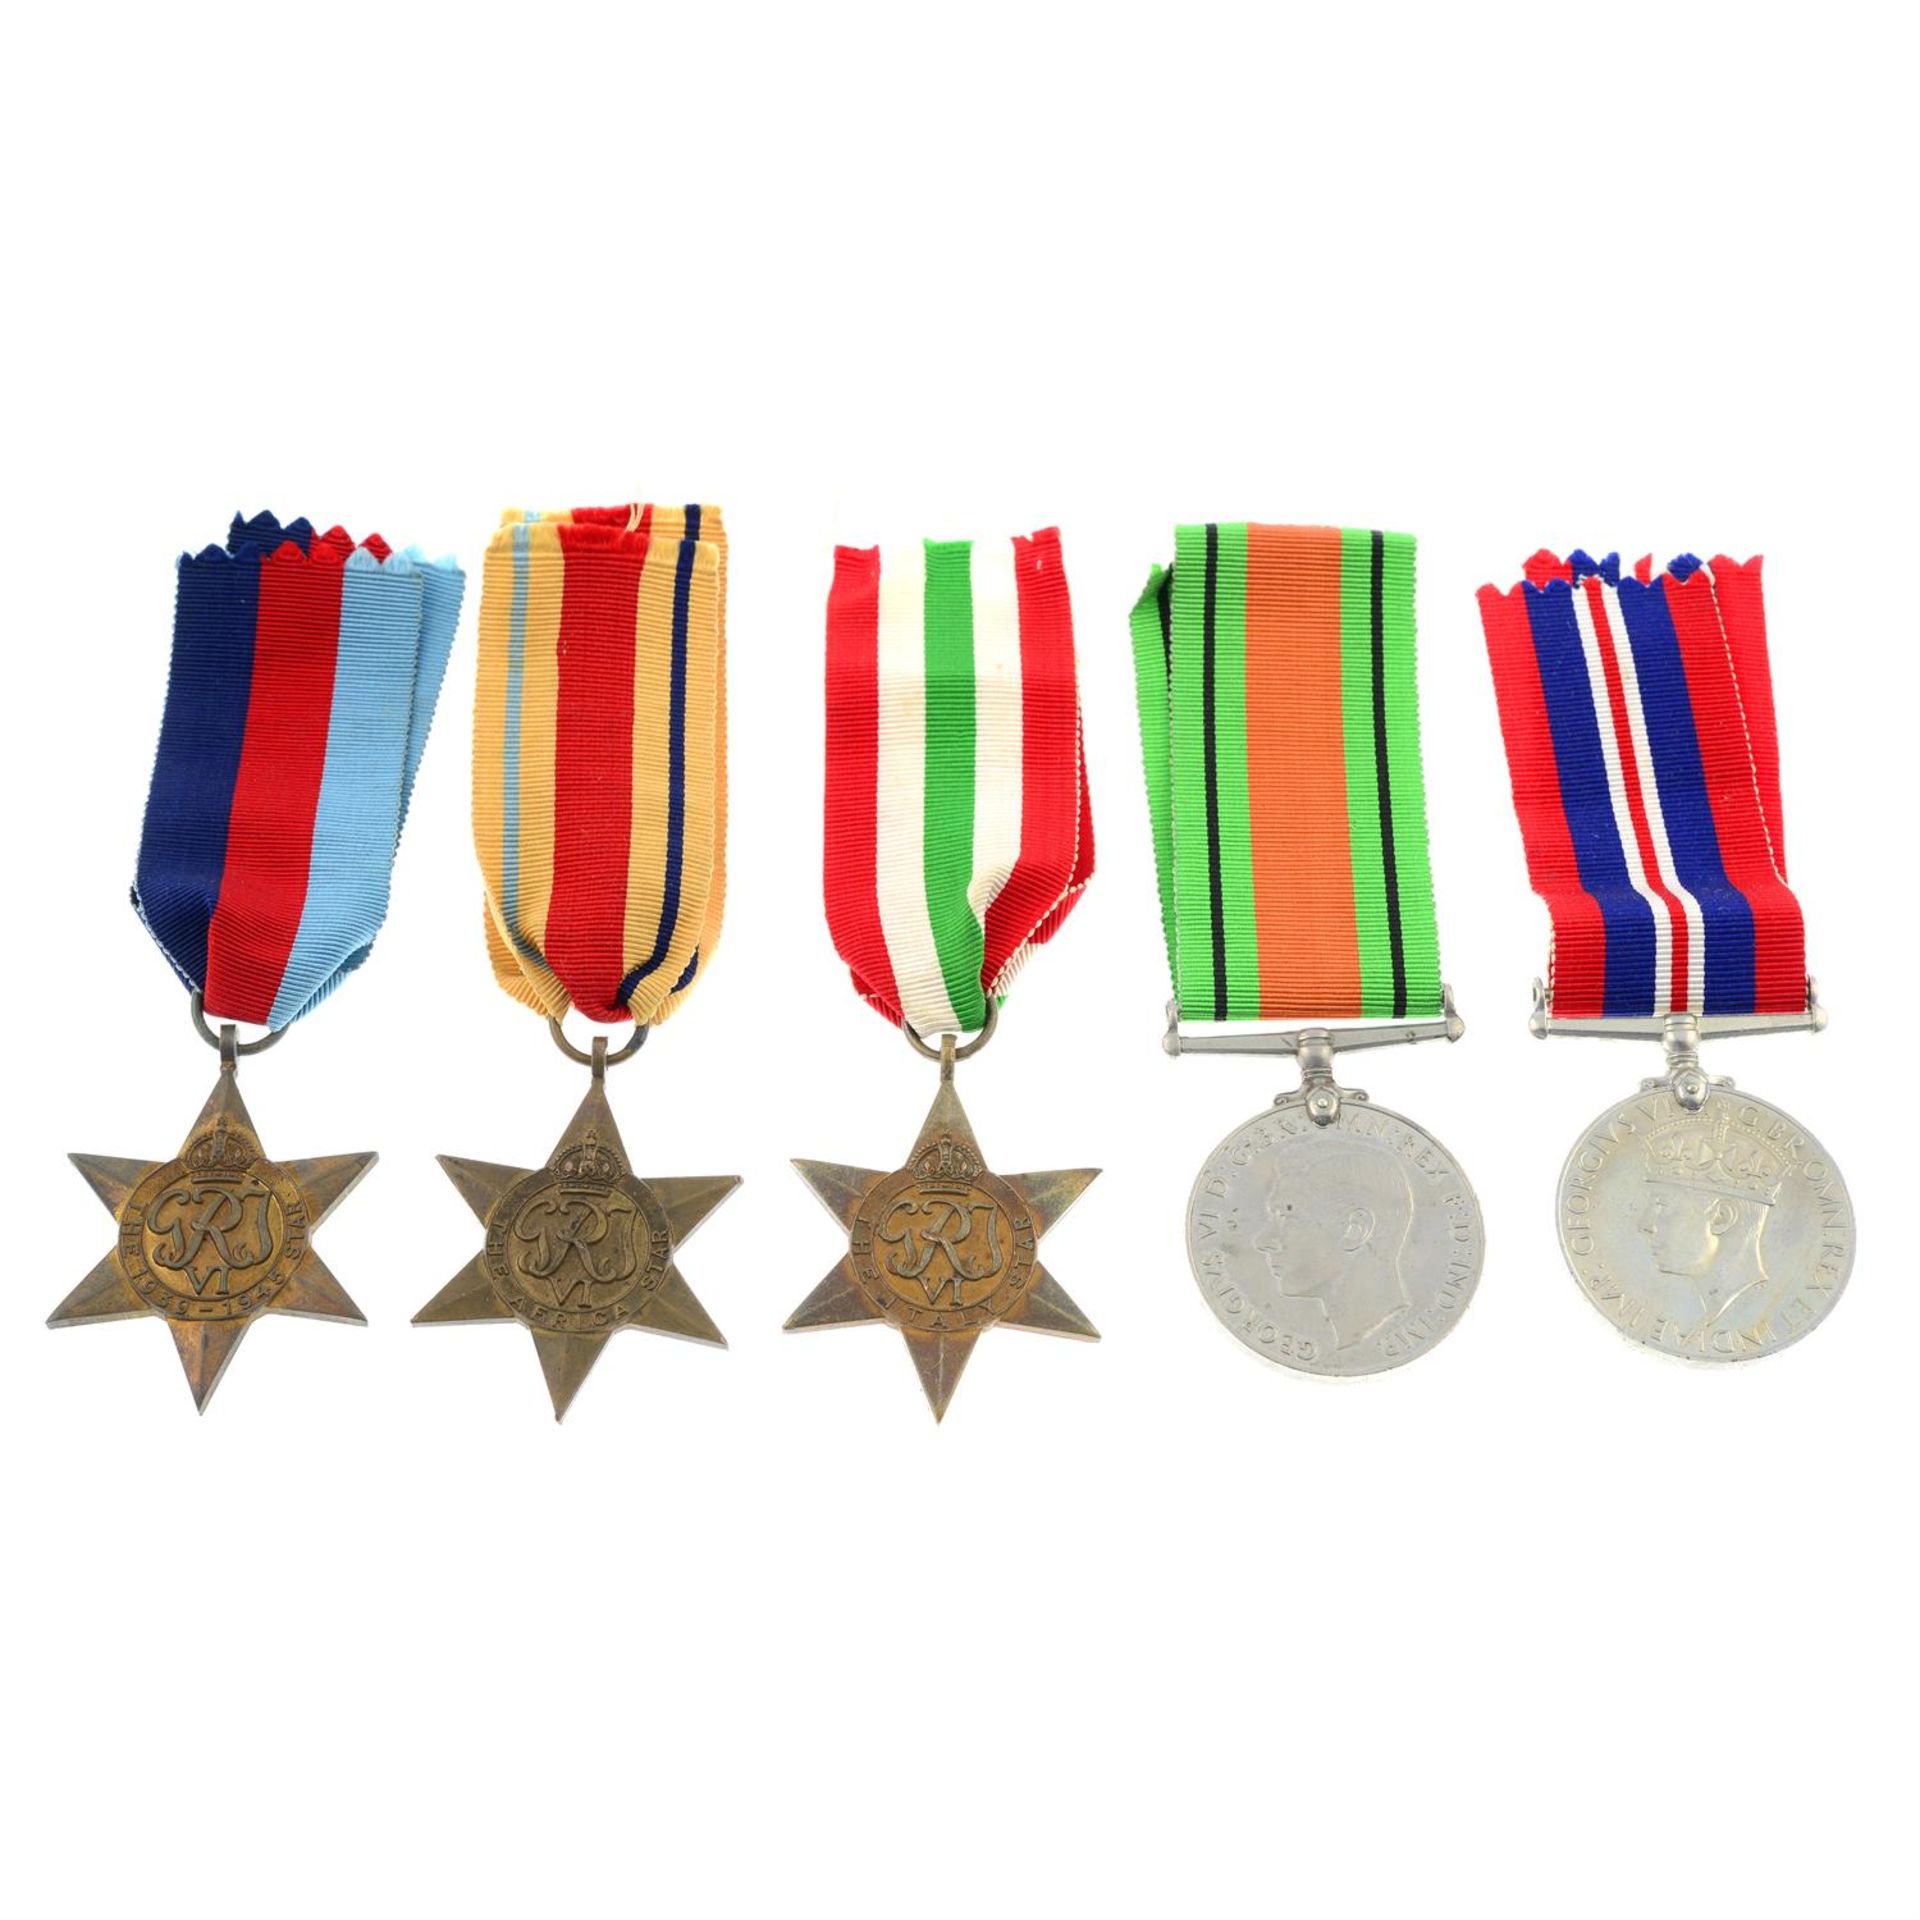 A selection of WWII medals (14), plus a postage box.